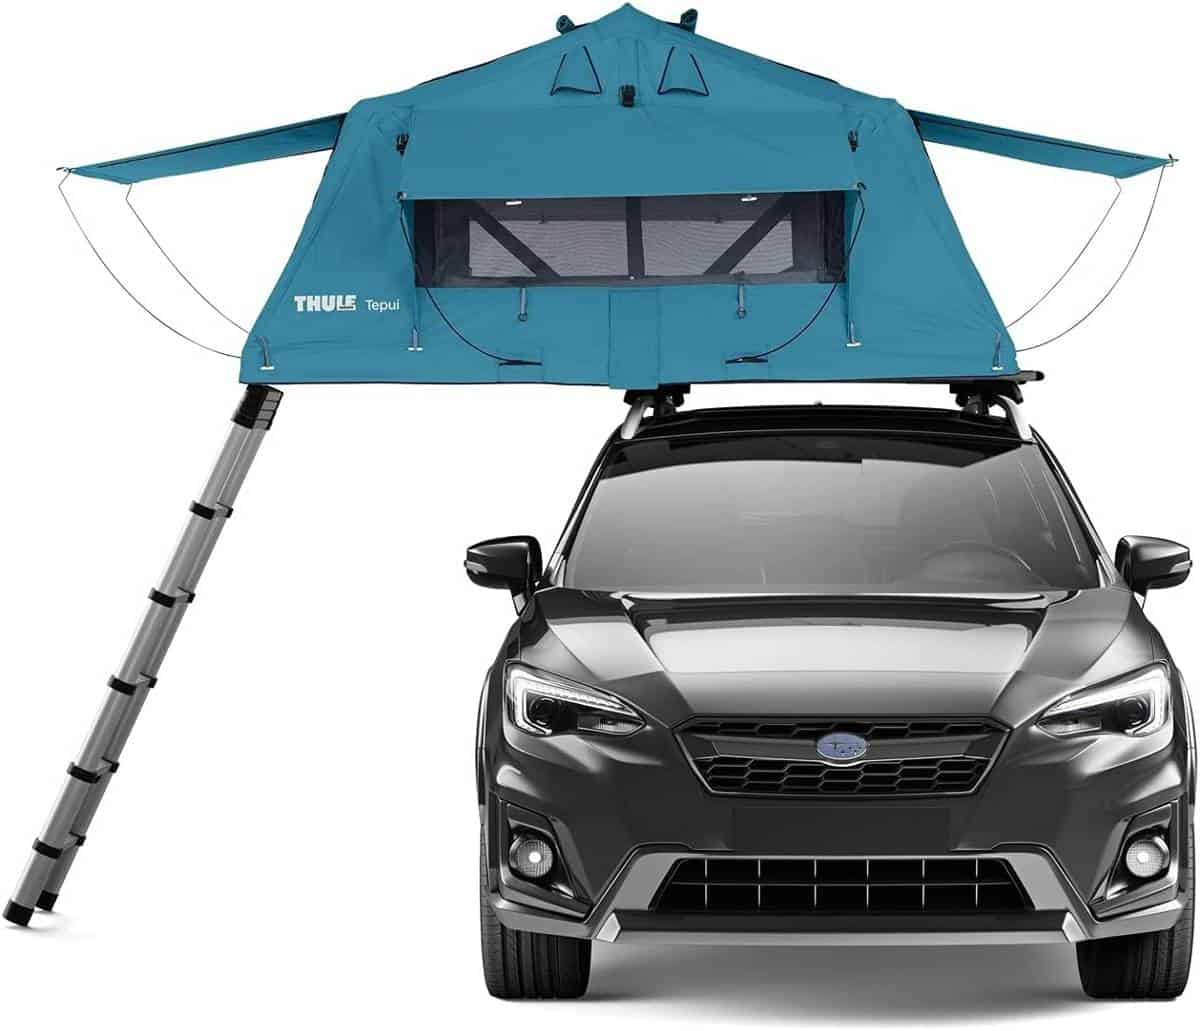 The Thule Tepui Explorer Ayer 2 Rooftop Tent